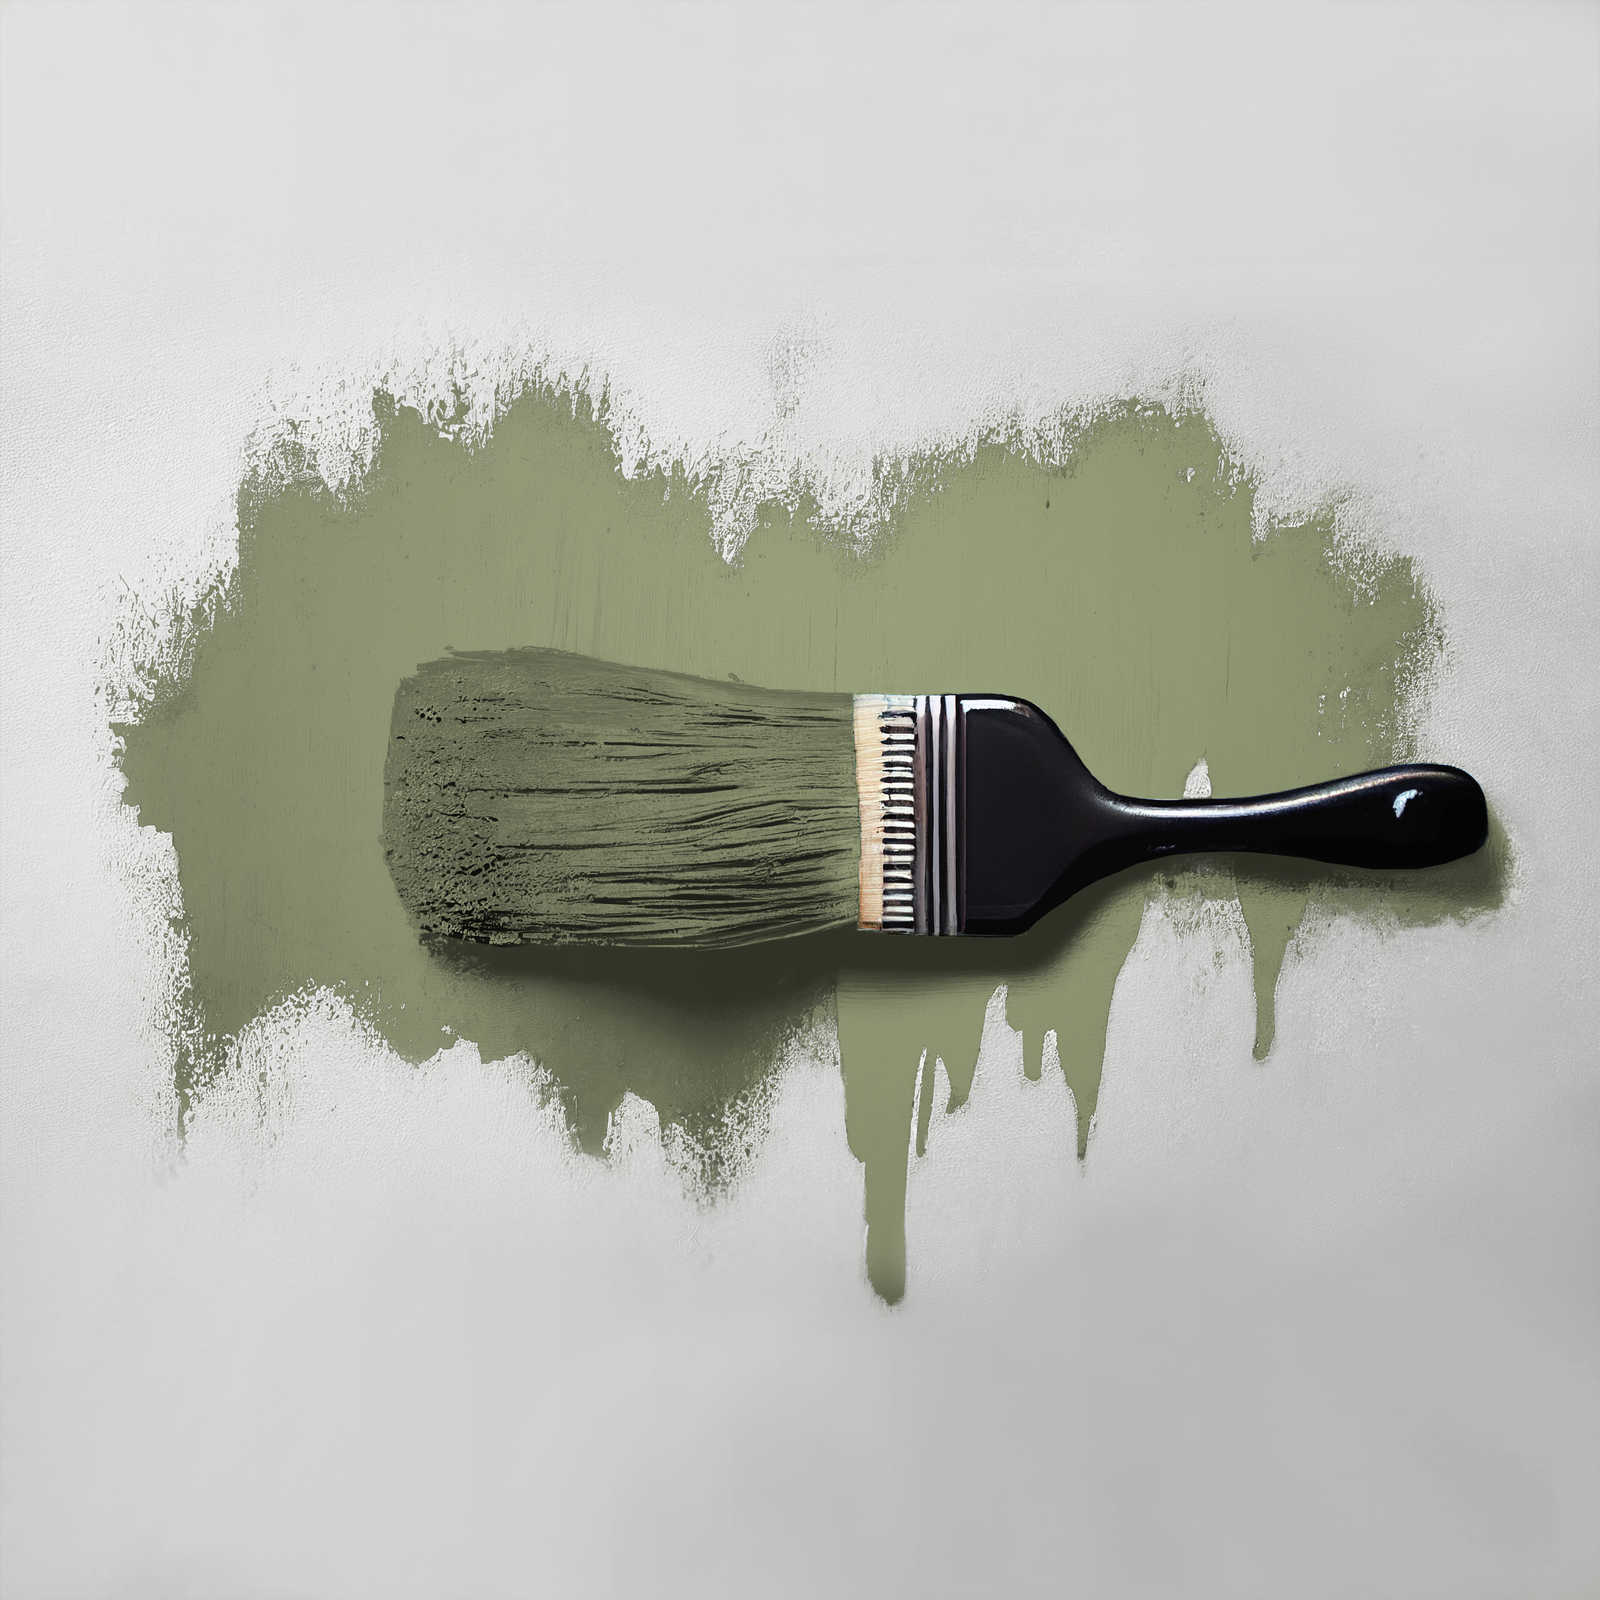             Wall Paint TCK4002 »Balmy Basil« in homely green – 5.0 litre
        